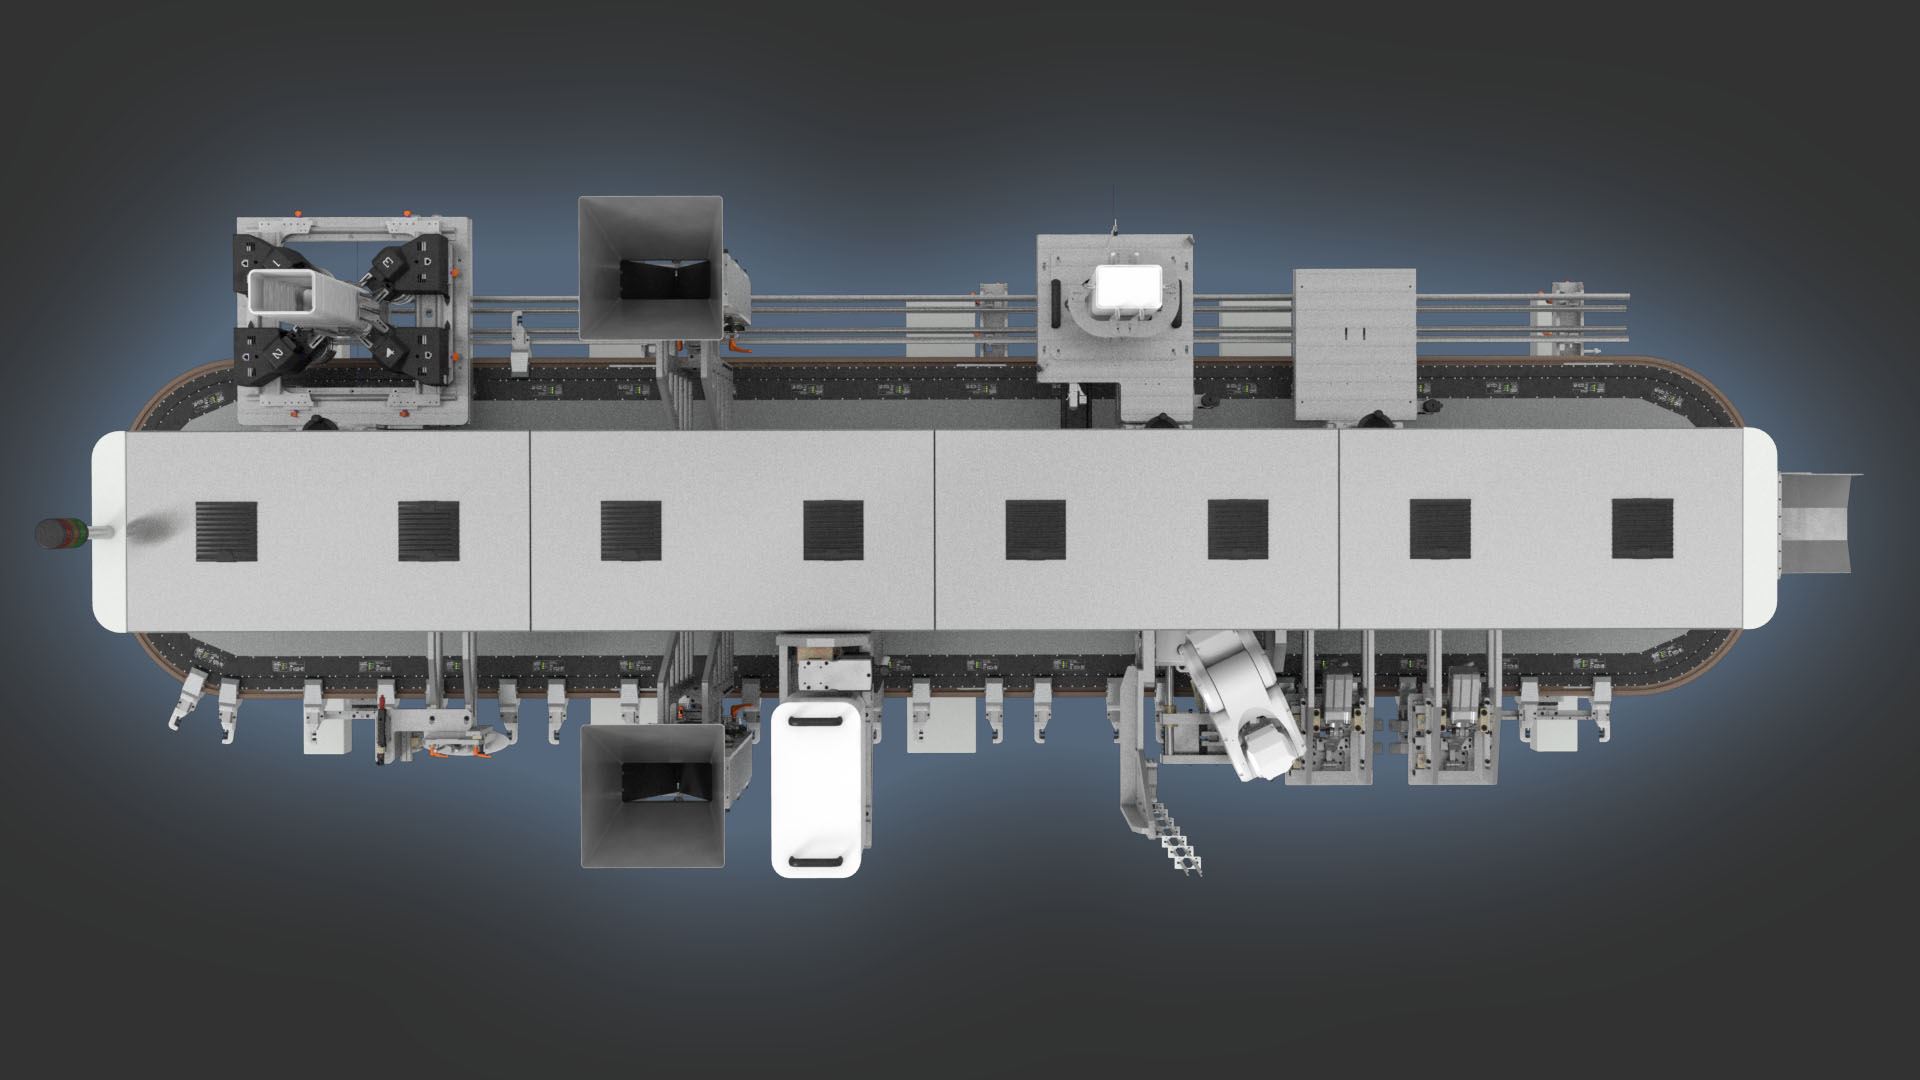 Topview of Doysis with four module base. Flexible packaging solutions.